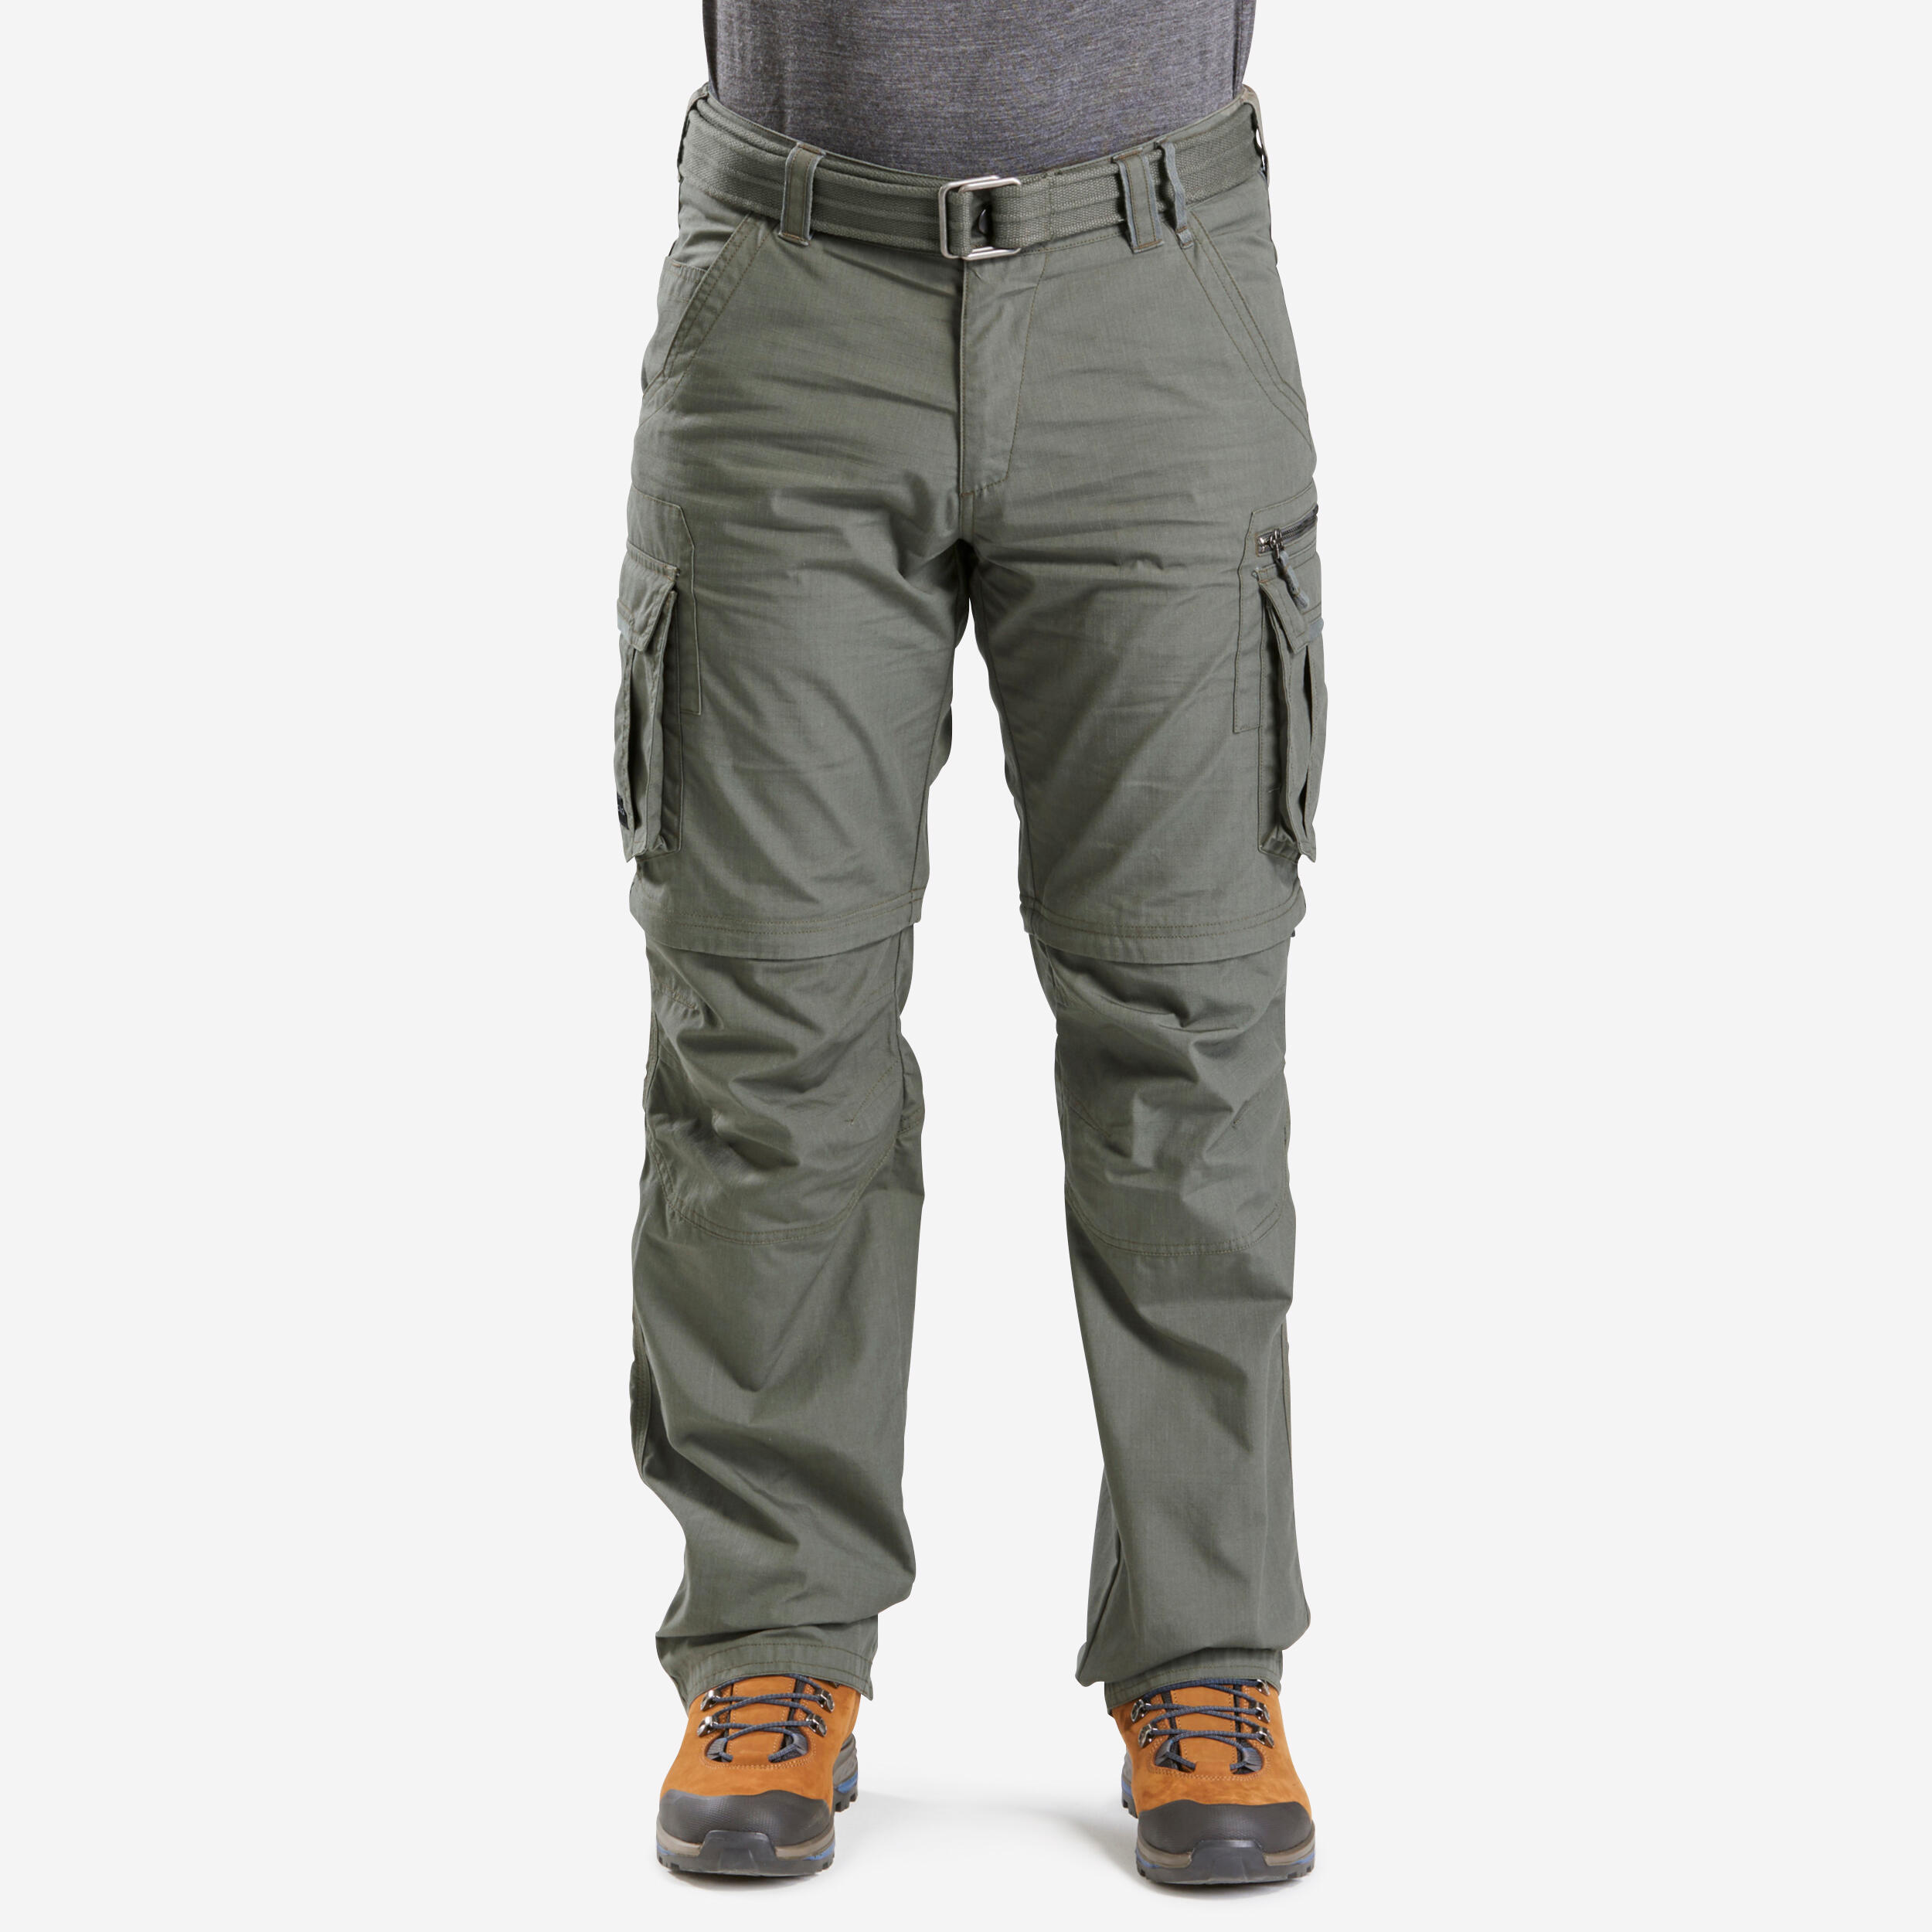 Green RecTrek Zip-Off Trousers by Outdoor Voices on Sale